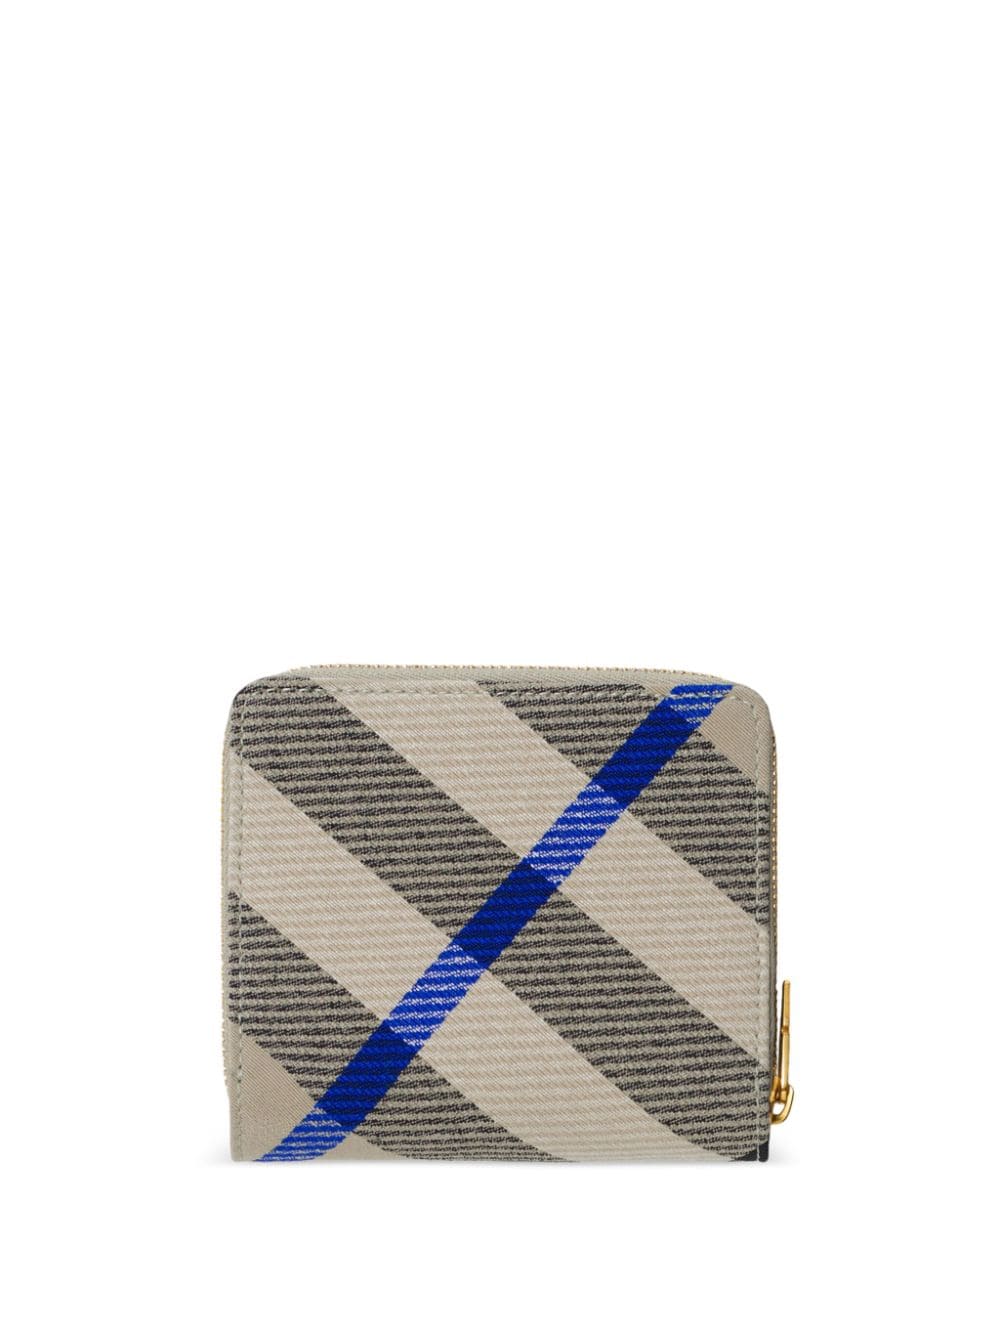 Burberry checkered leather wallet - Beige